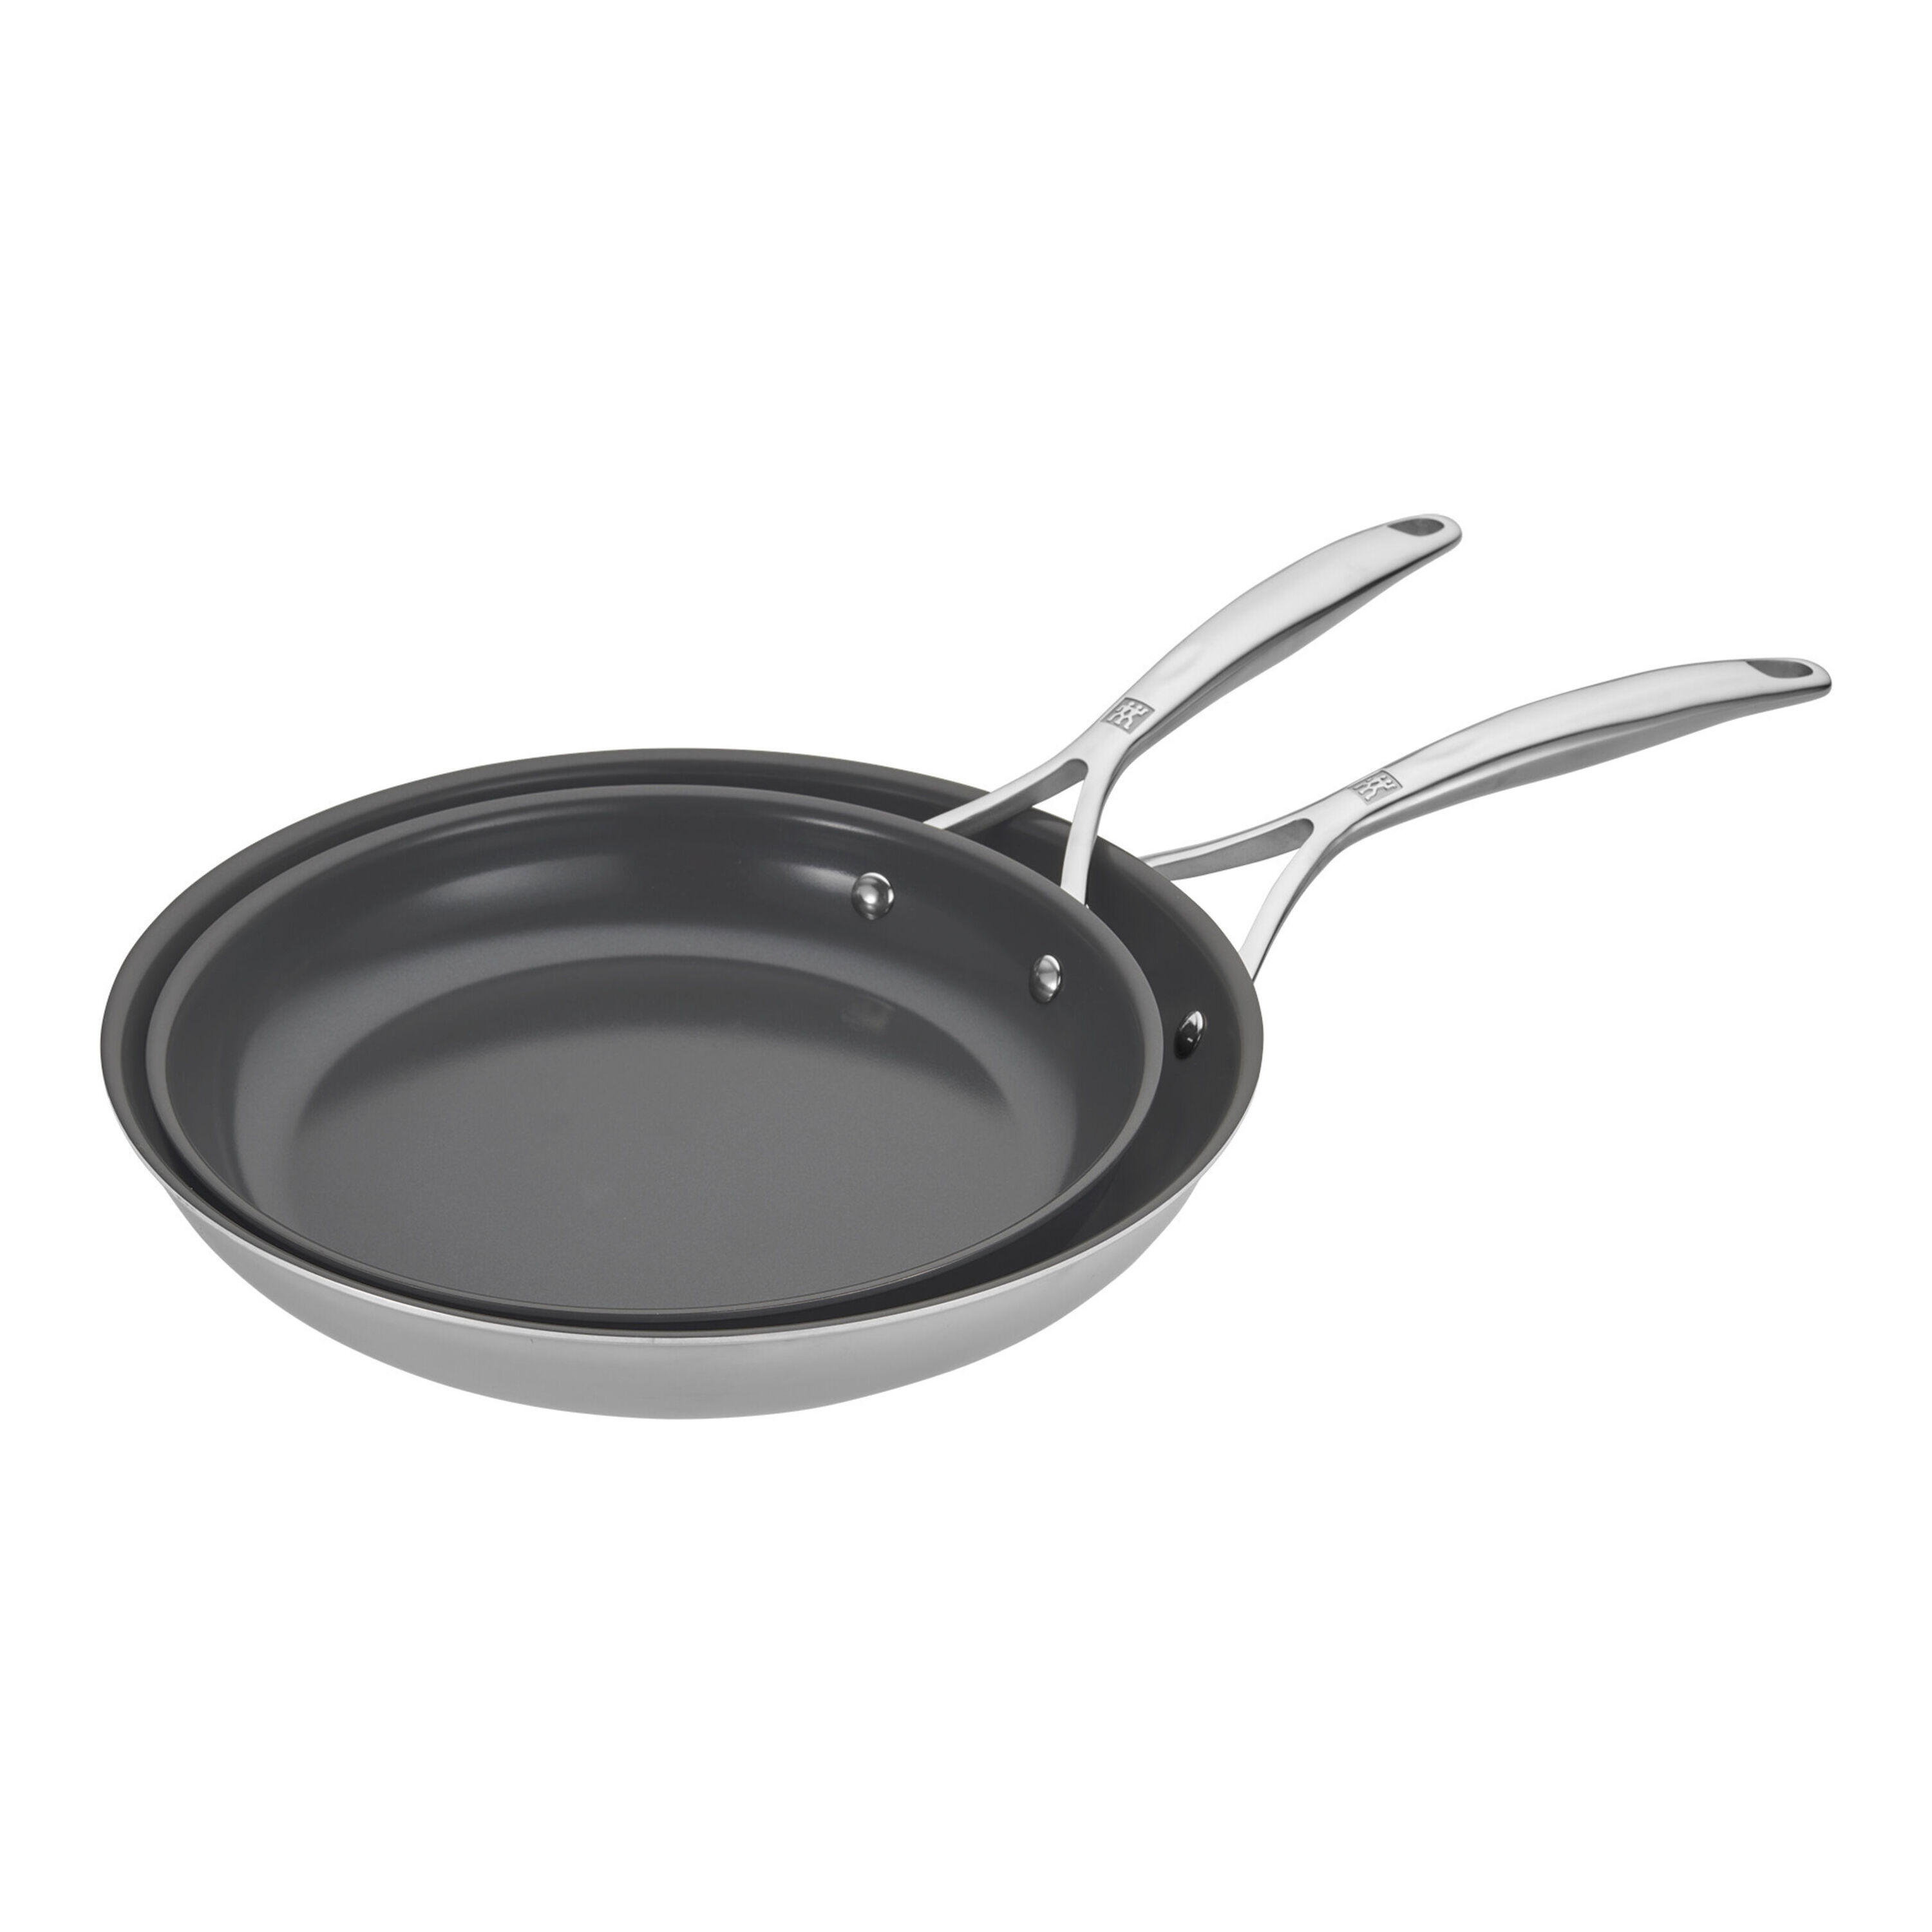 Signature Stainless Steel 2-Piece Fry Pan Set